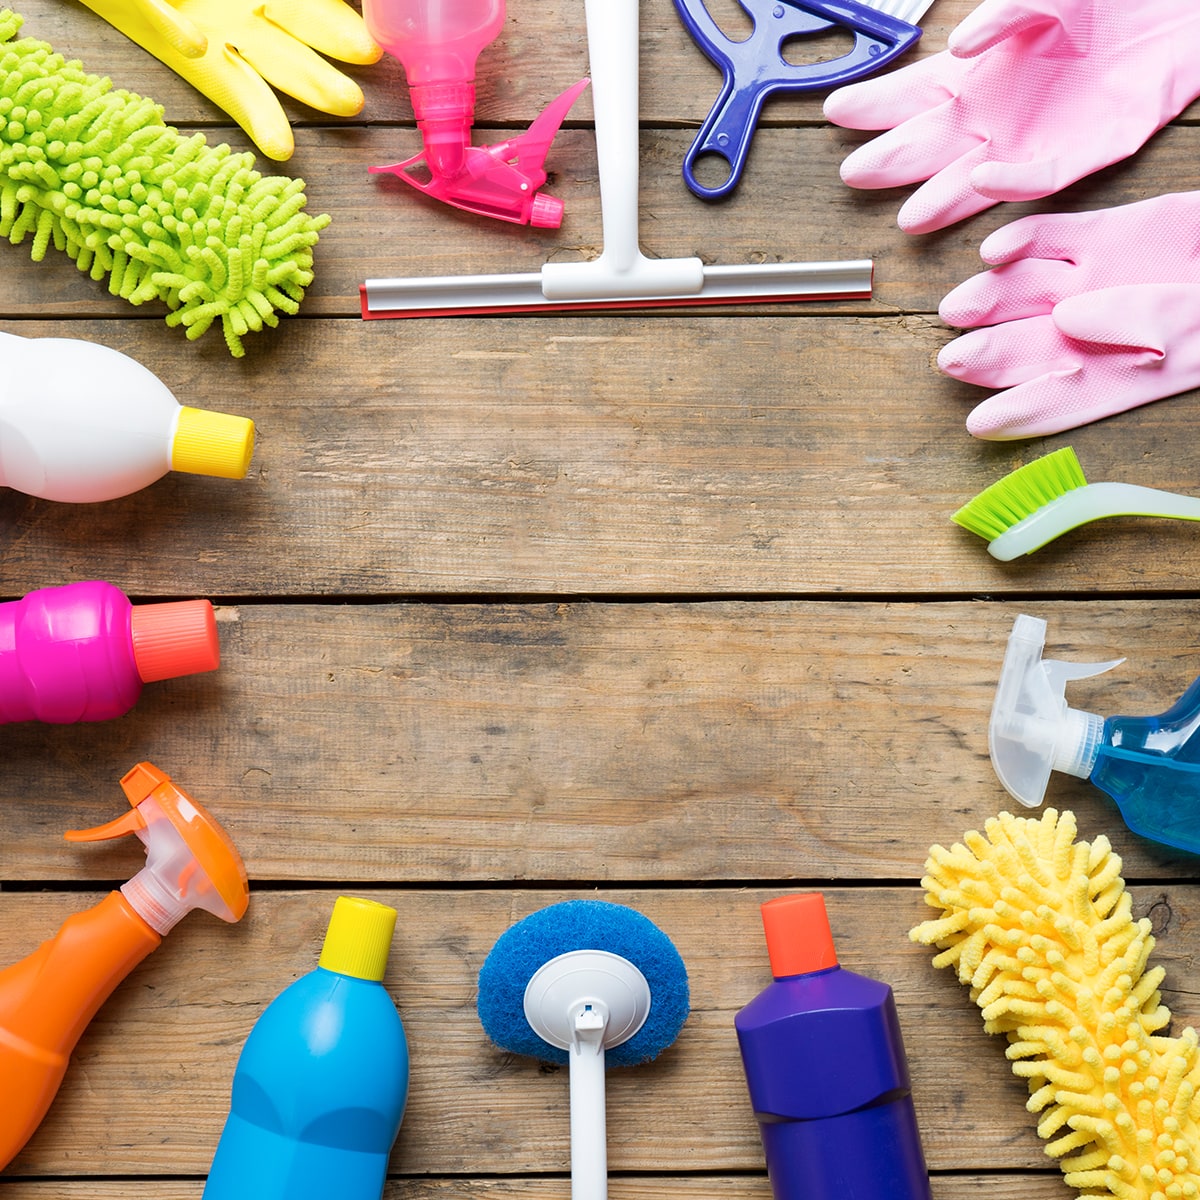 Spring Cleaning Hacks to Try